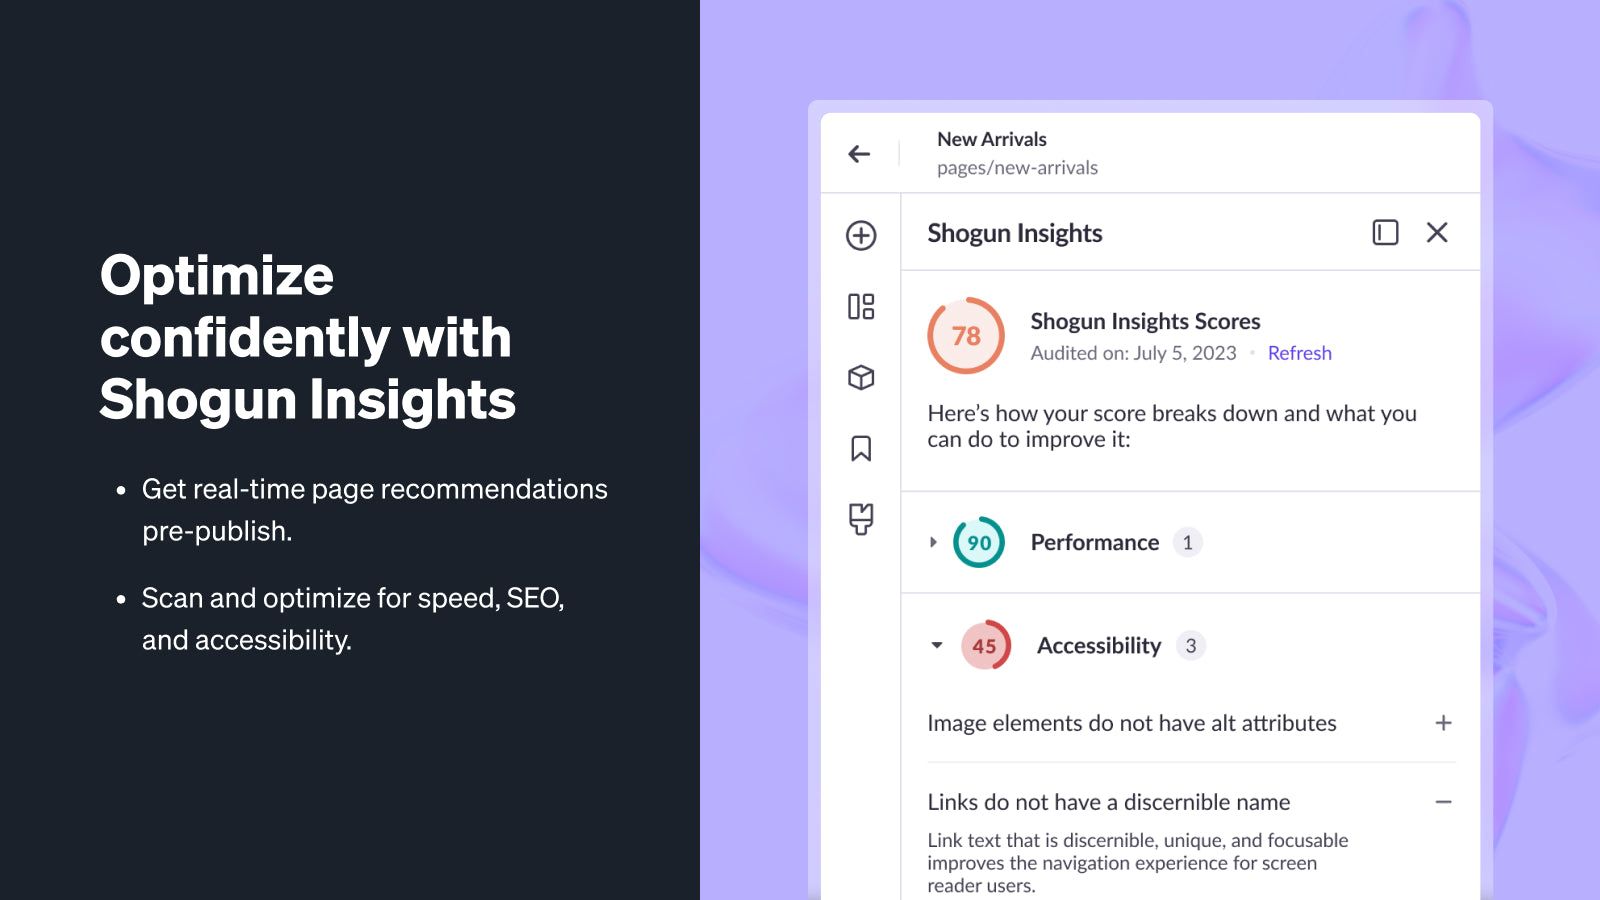 Optimize confidently with Shogun Insights